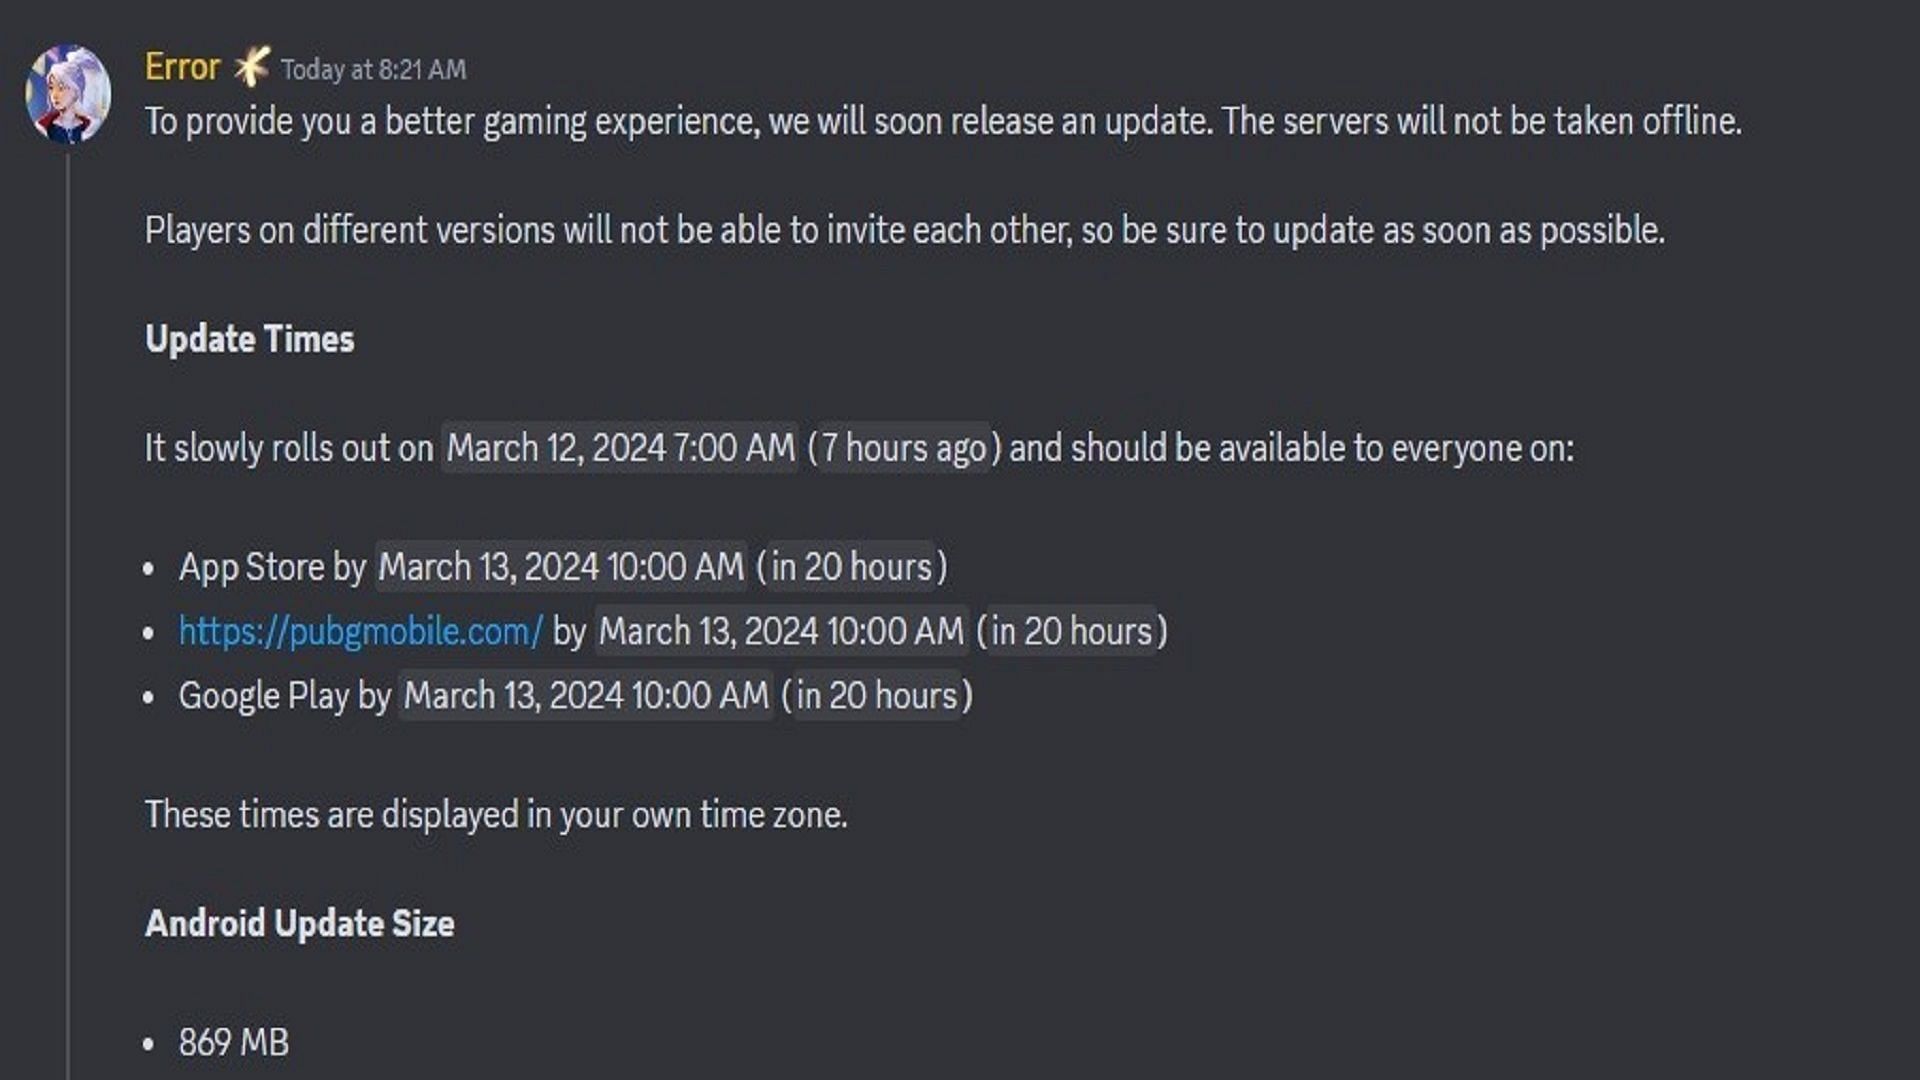 The APK file will be made available by March 13, 10:00 AM UTC (Image via PUBG Mobile / Discord)